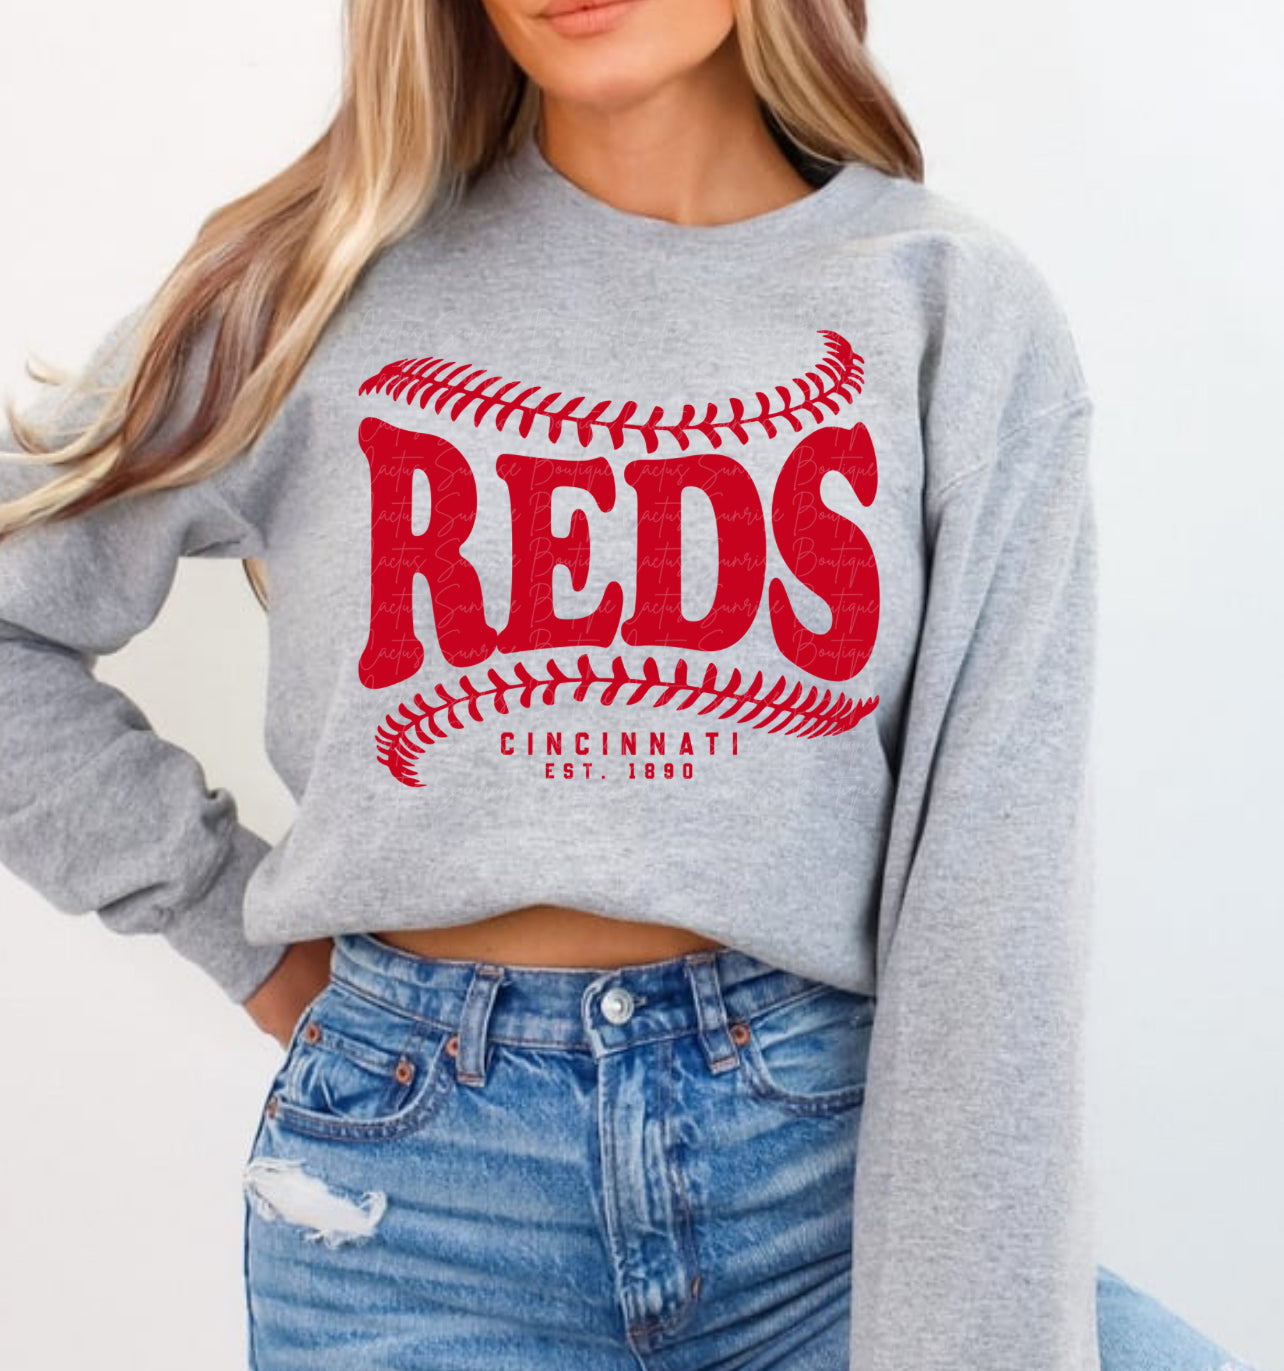 Reds Cincinnati (ready for shipping/pickup)